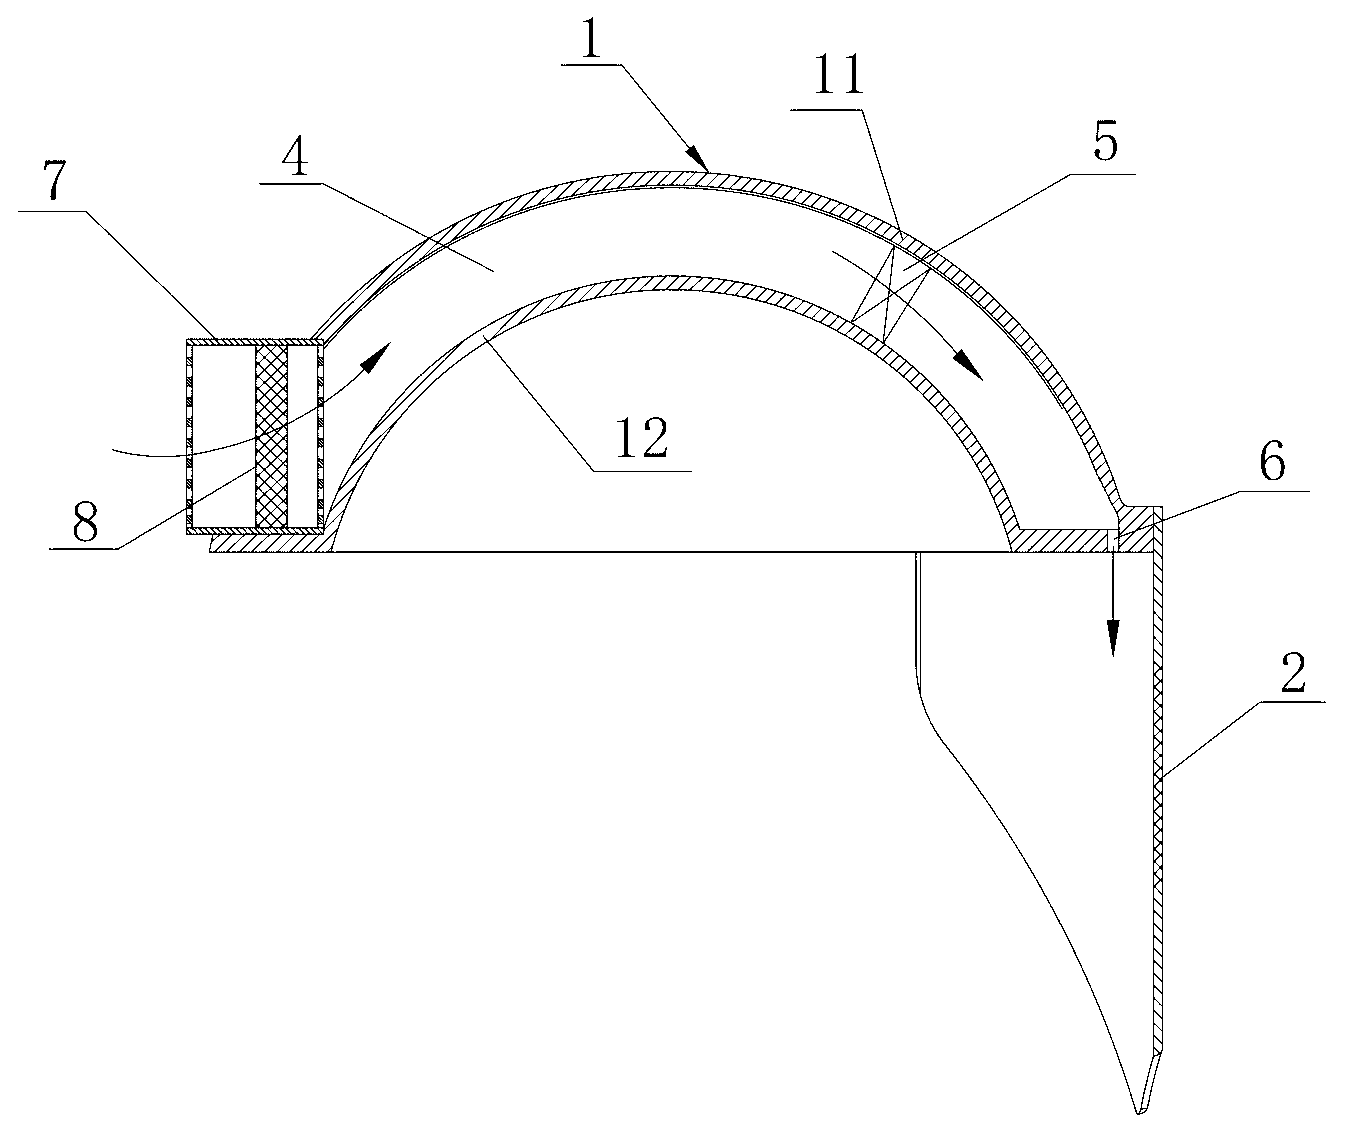 Semi-open type positive-pressure air supplying and purifying helmet shield